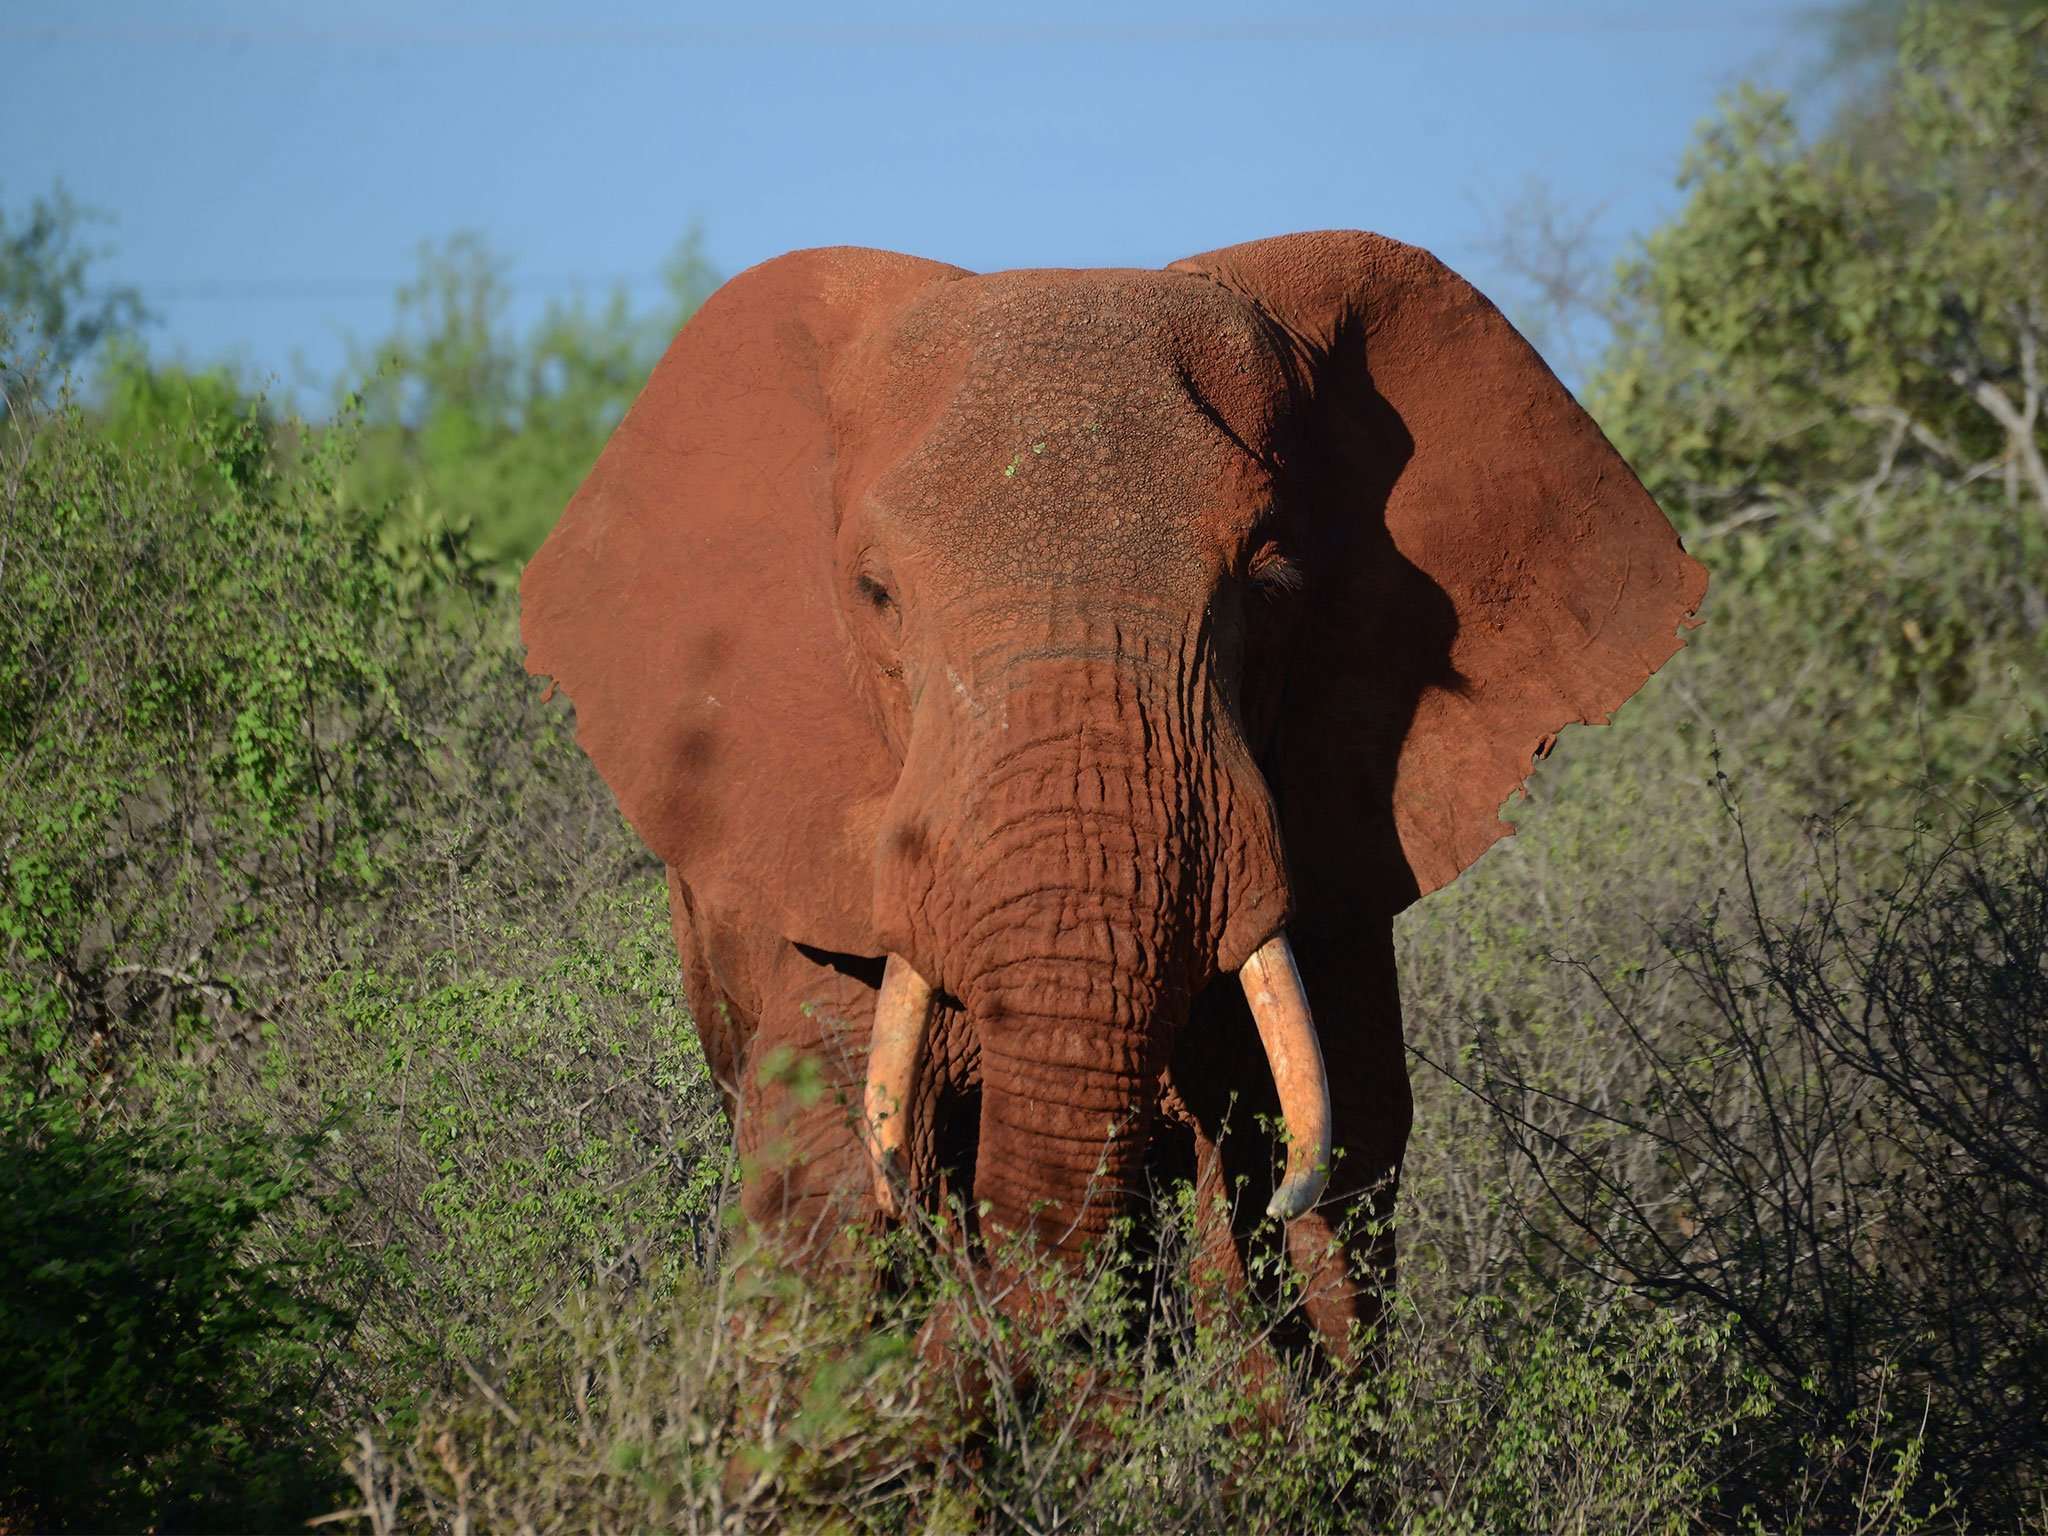 image for Elephant poachers shot dead by rangers at wildlife reserve in Kenya